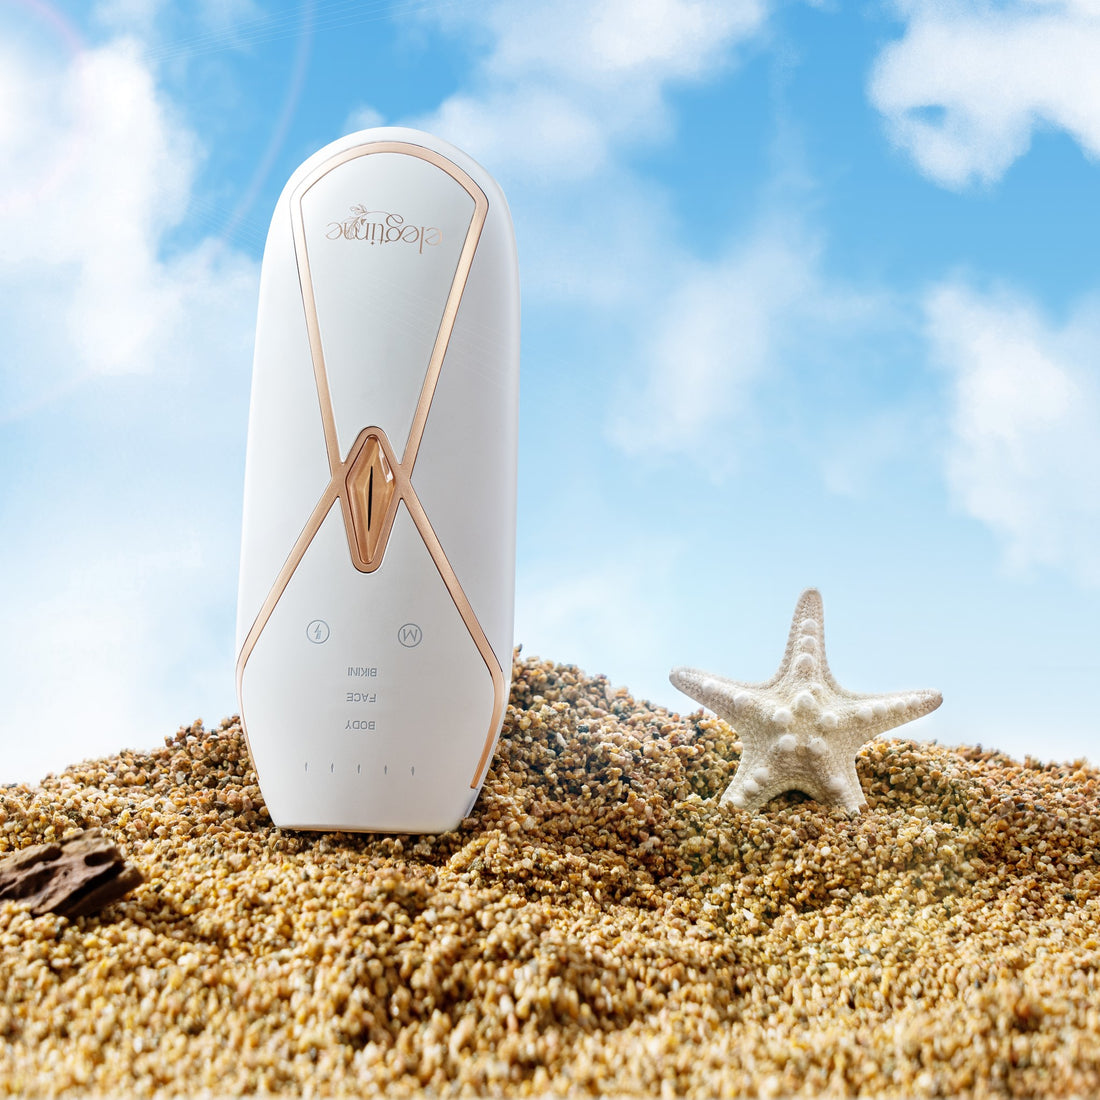 Product image of the Elegtime Sapphire IPL Hair Removal Handset - Troidini Edition featuring summer elements such as a blue sky, a starfish, and a beach.